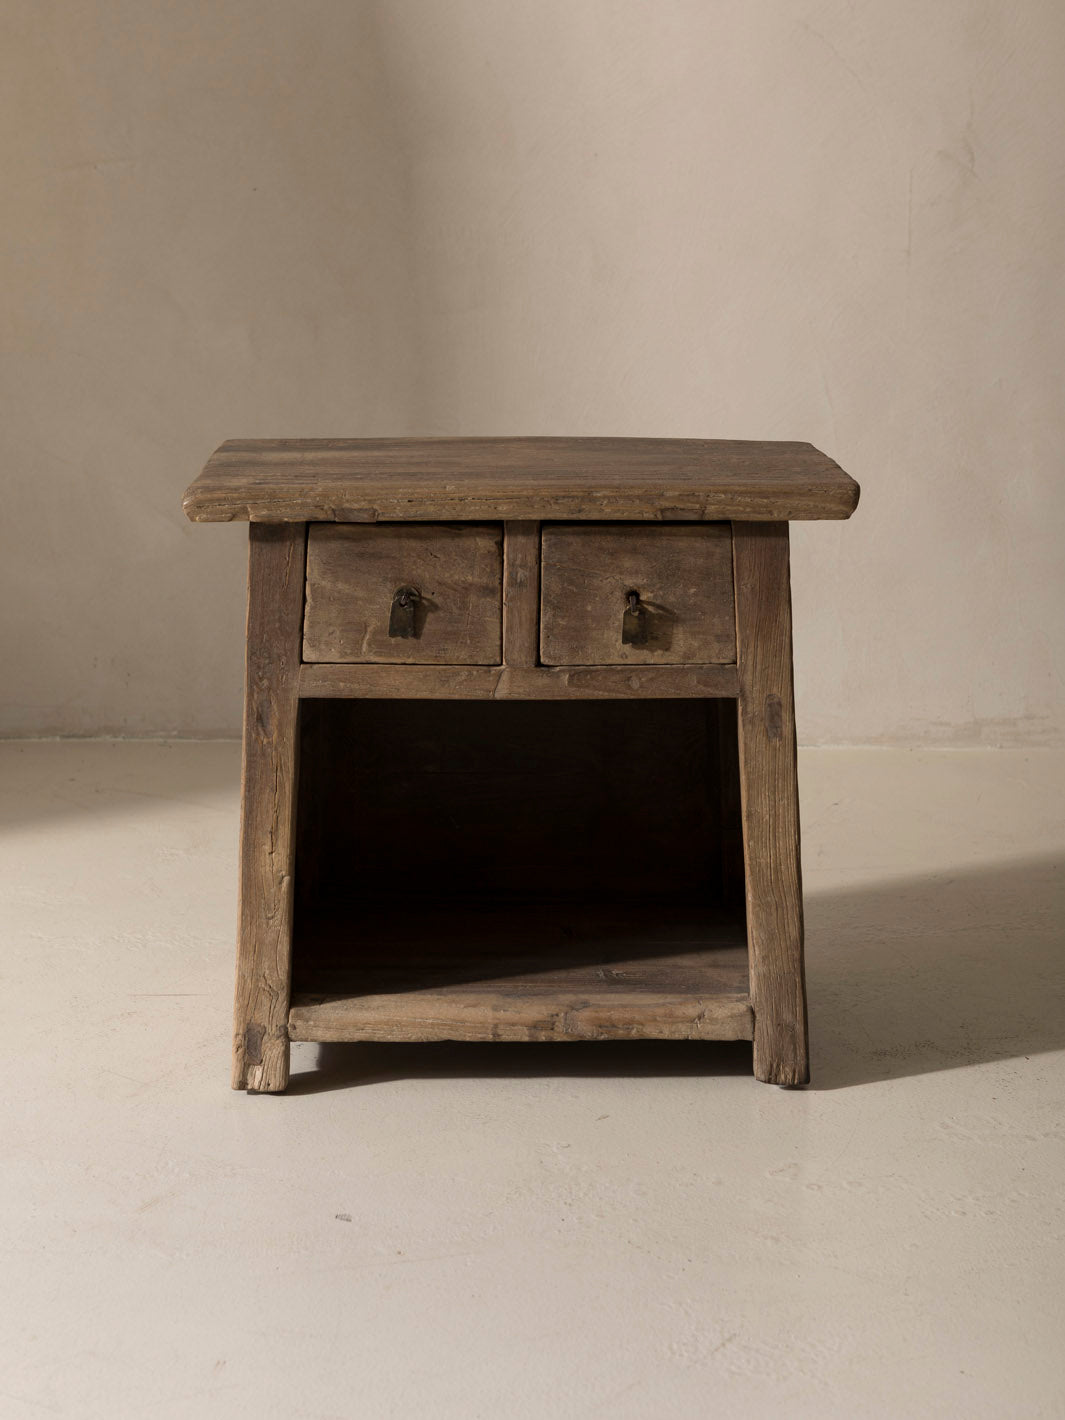 Small Chinese Auxiliary Furniture late 19th century